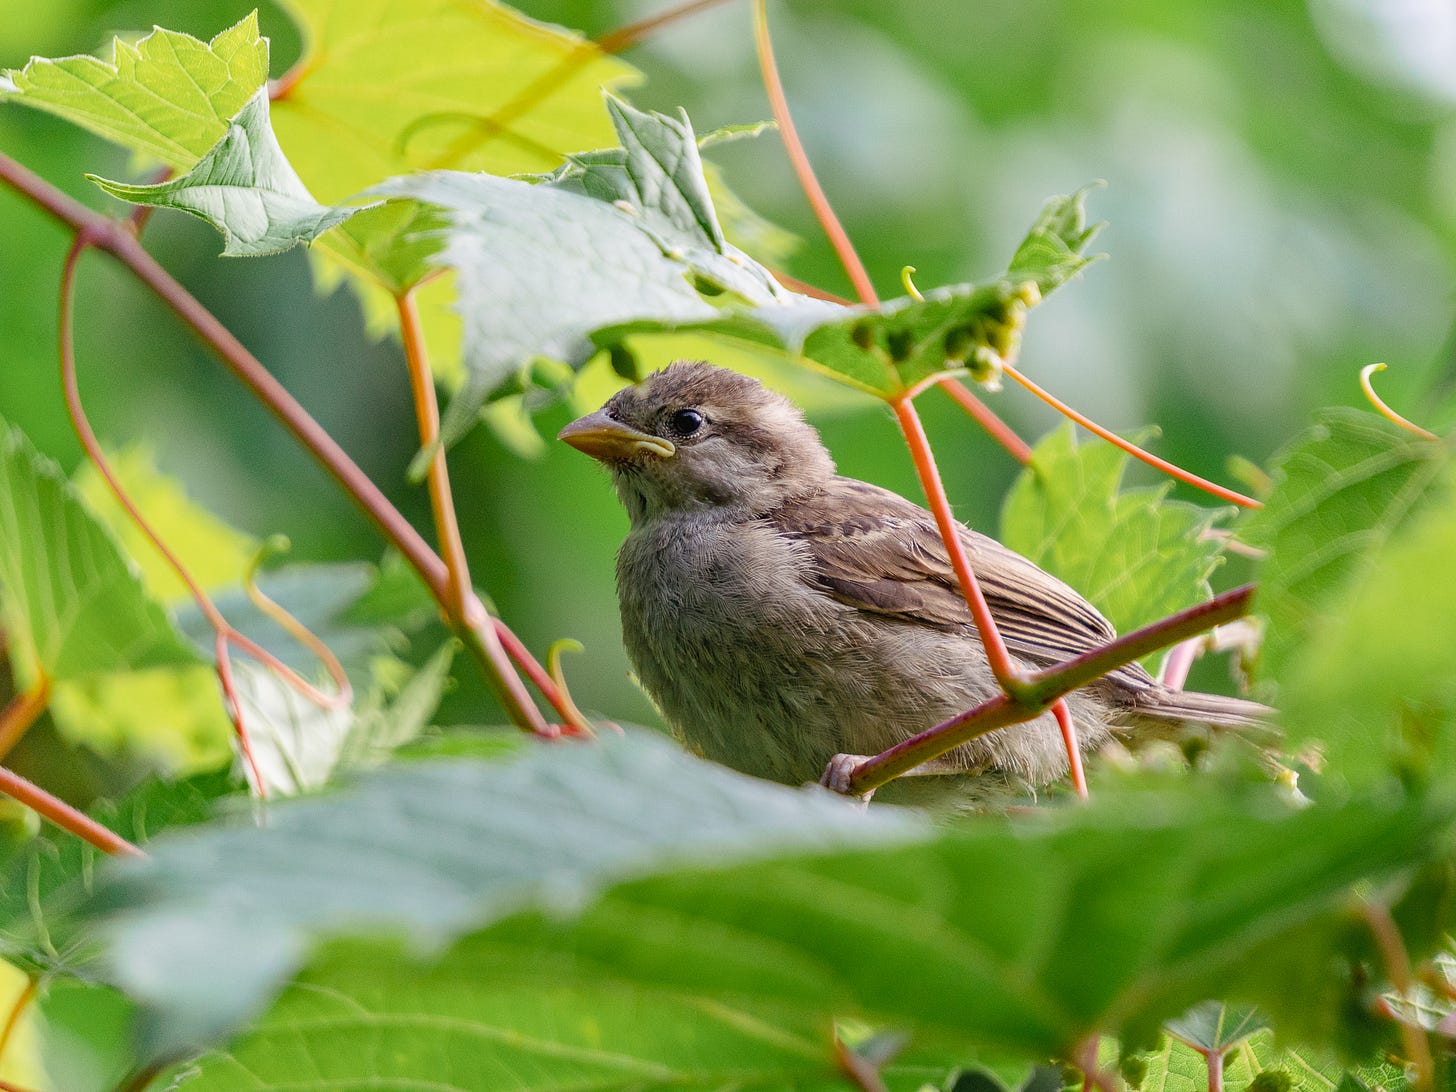 a brown house sparrow amongst reddish vines with green leaves